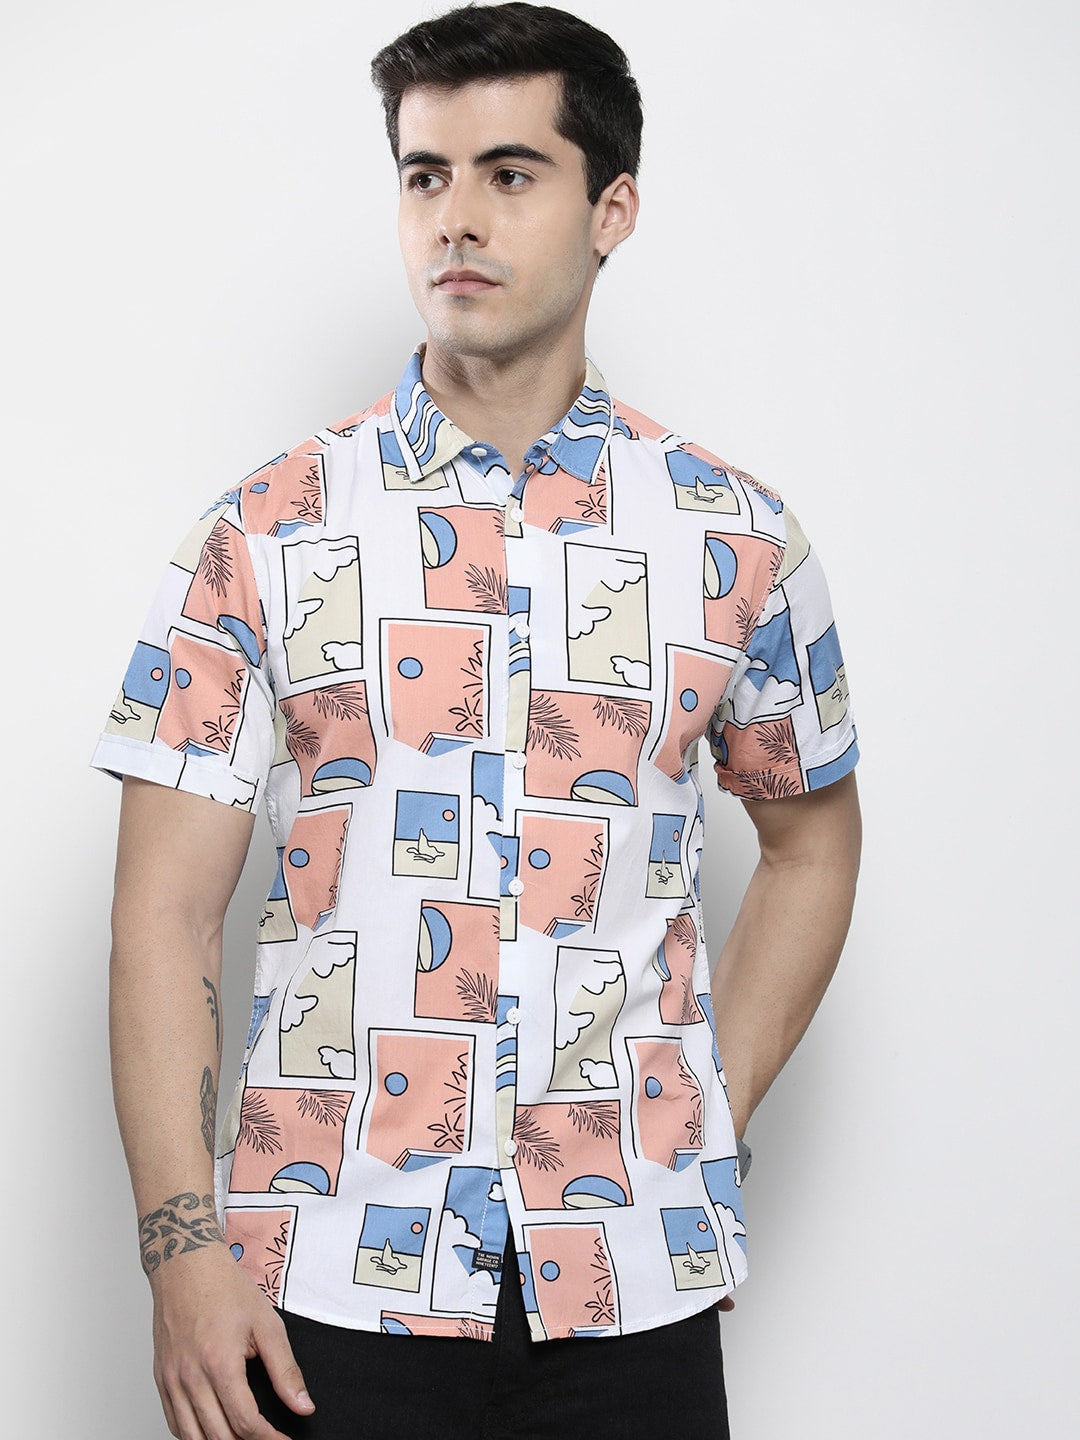 Shop The Indian Garage Co Men White Printed Cotton Casual Shirt Online.